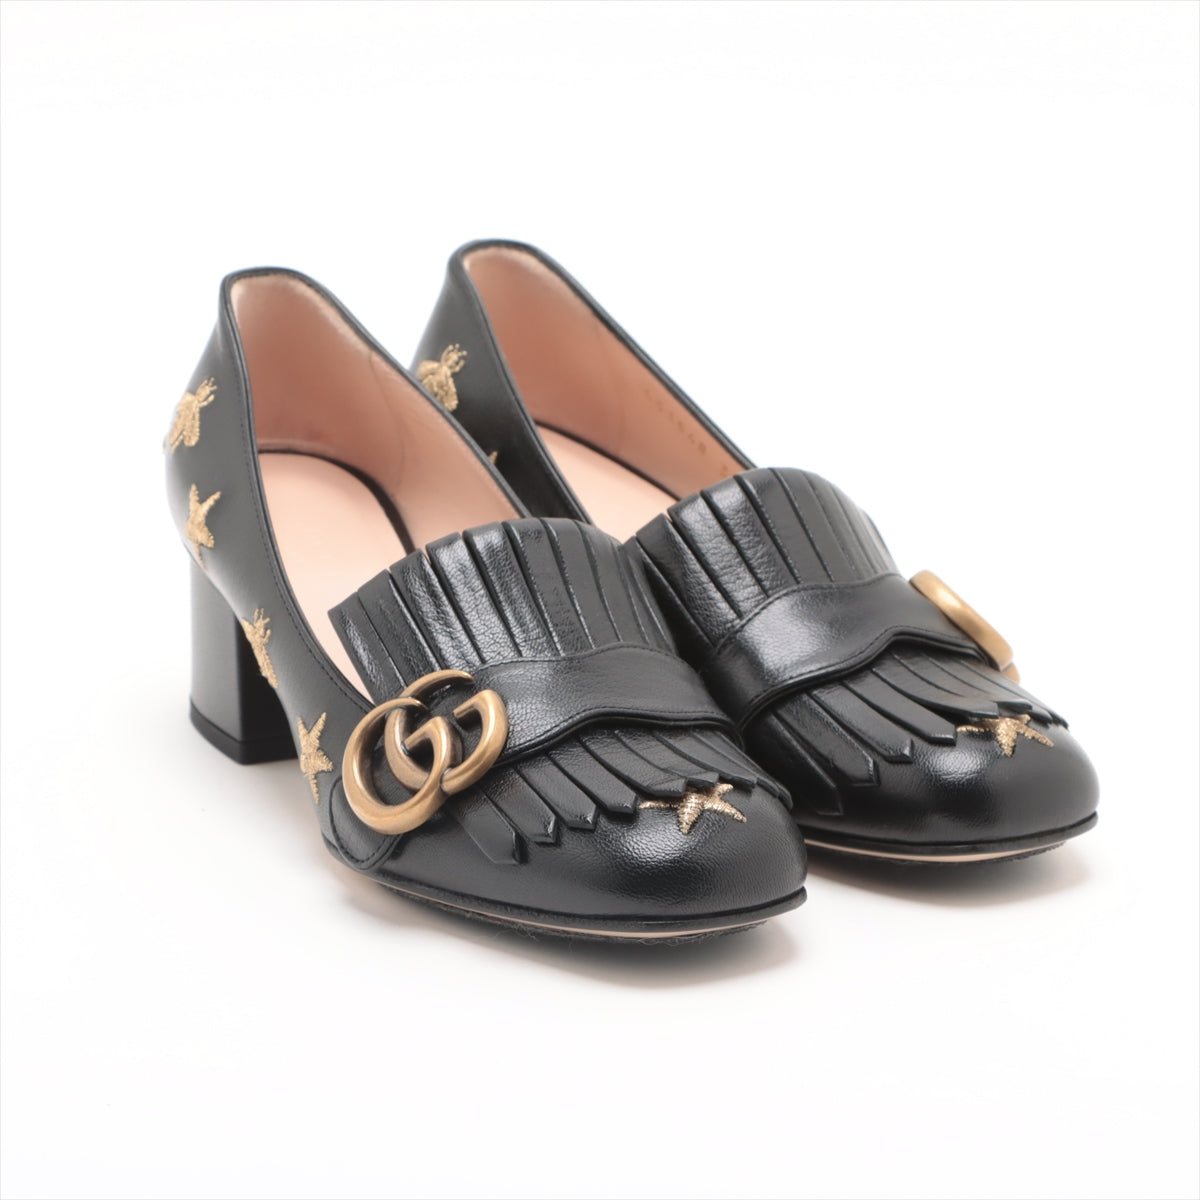 Gucci GG Marmont Leather Pumps 35.5 Ladies' Black 551548 Bee Star embroidery Fringe There is a box